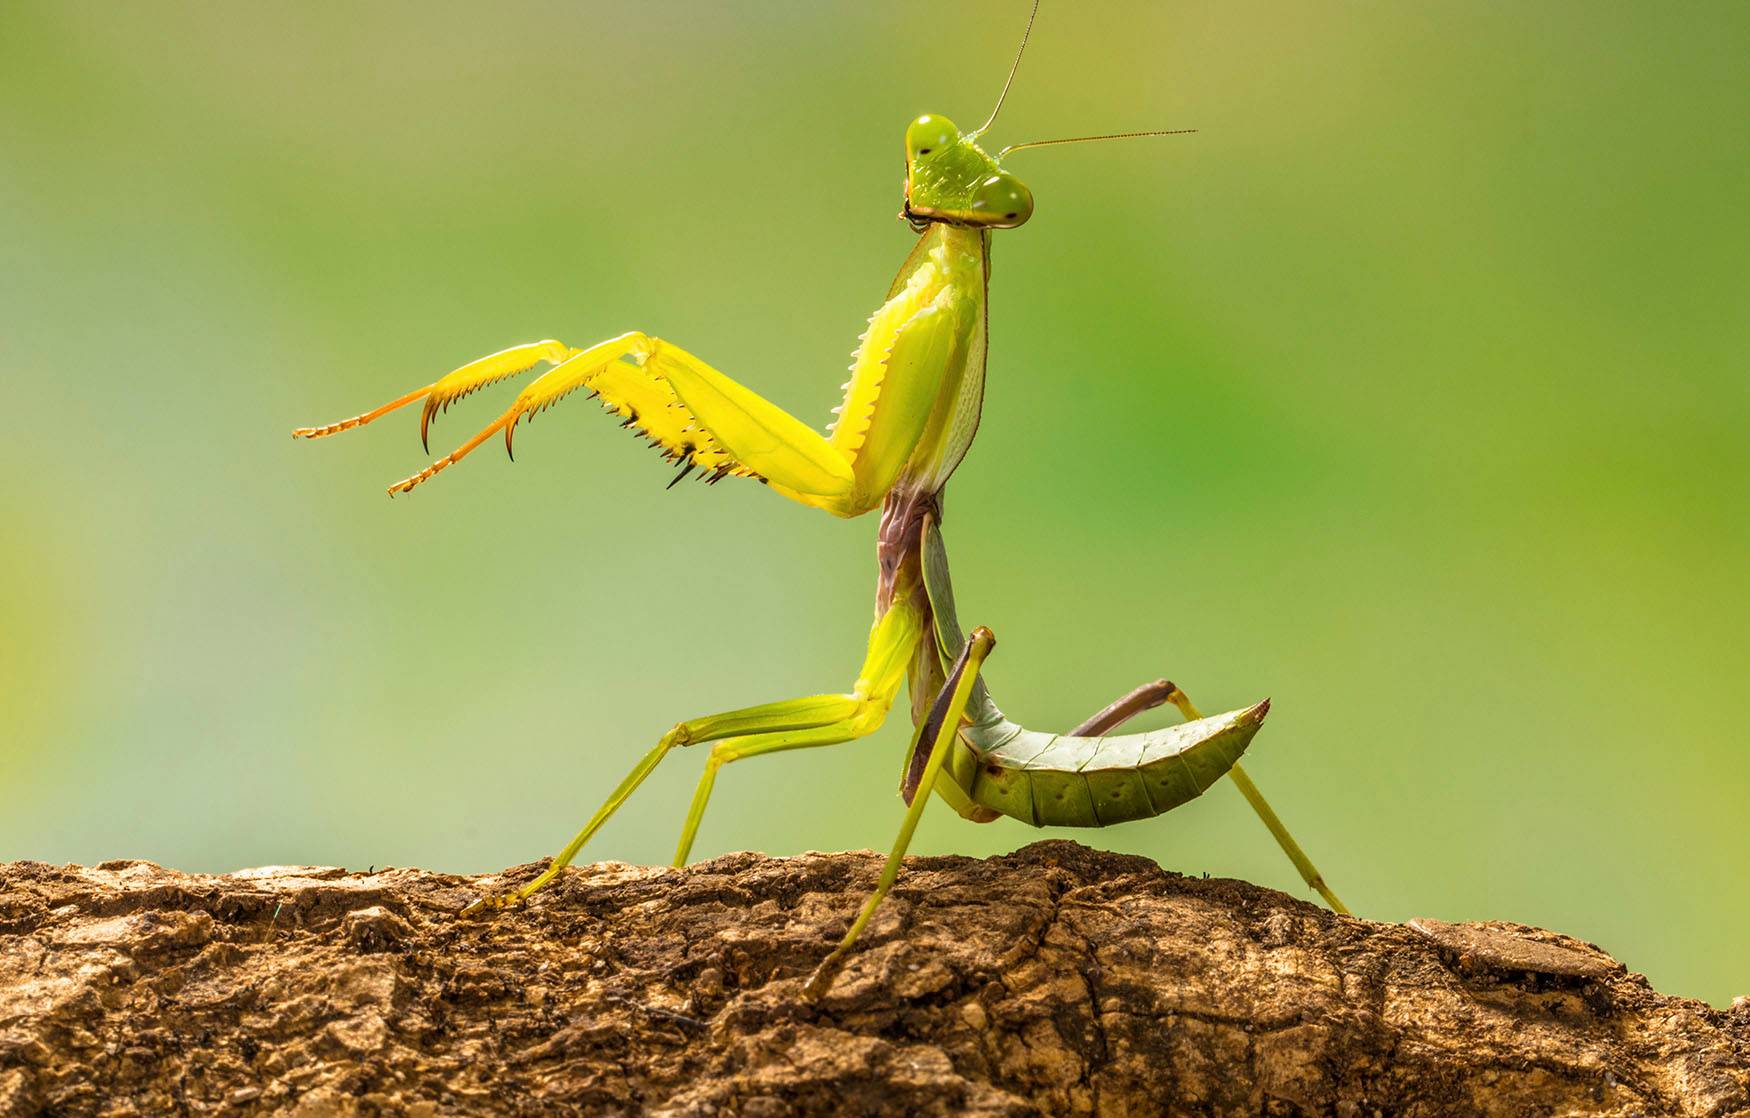 Researchers noticed mantis sexual deathmatches… for science